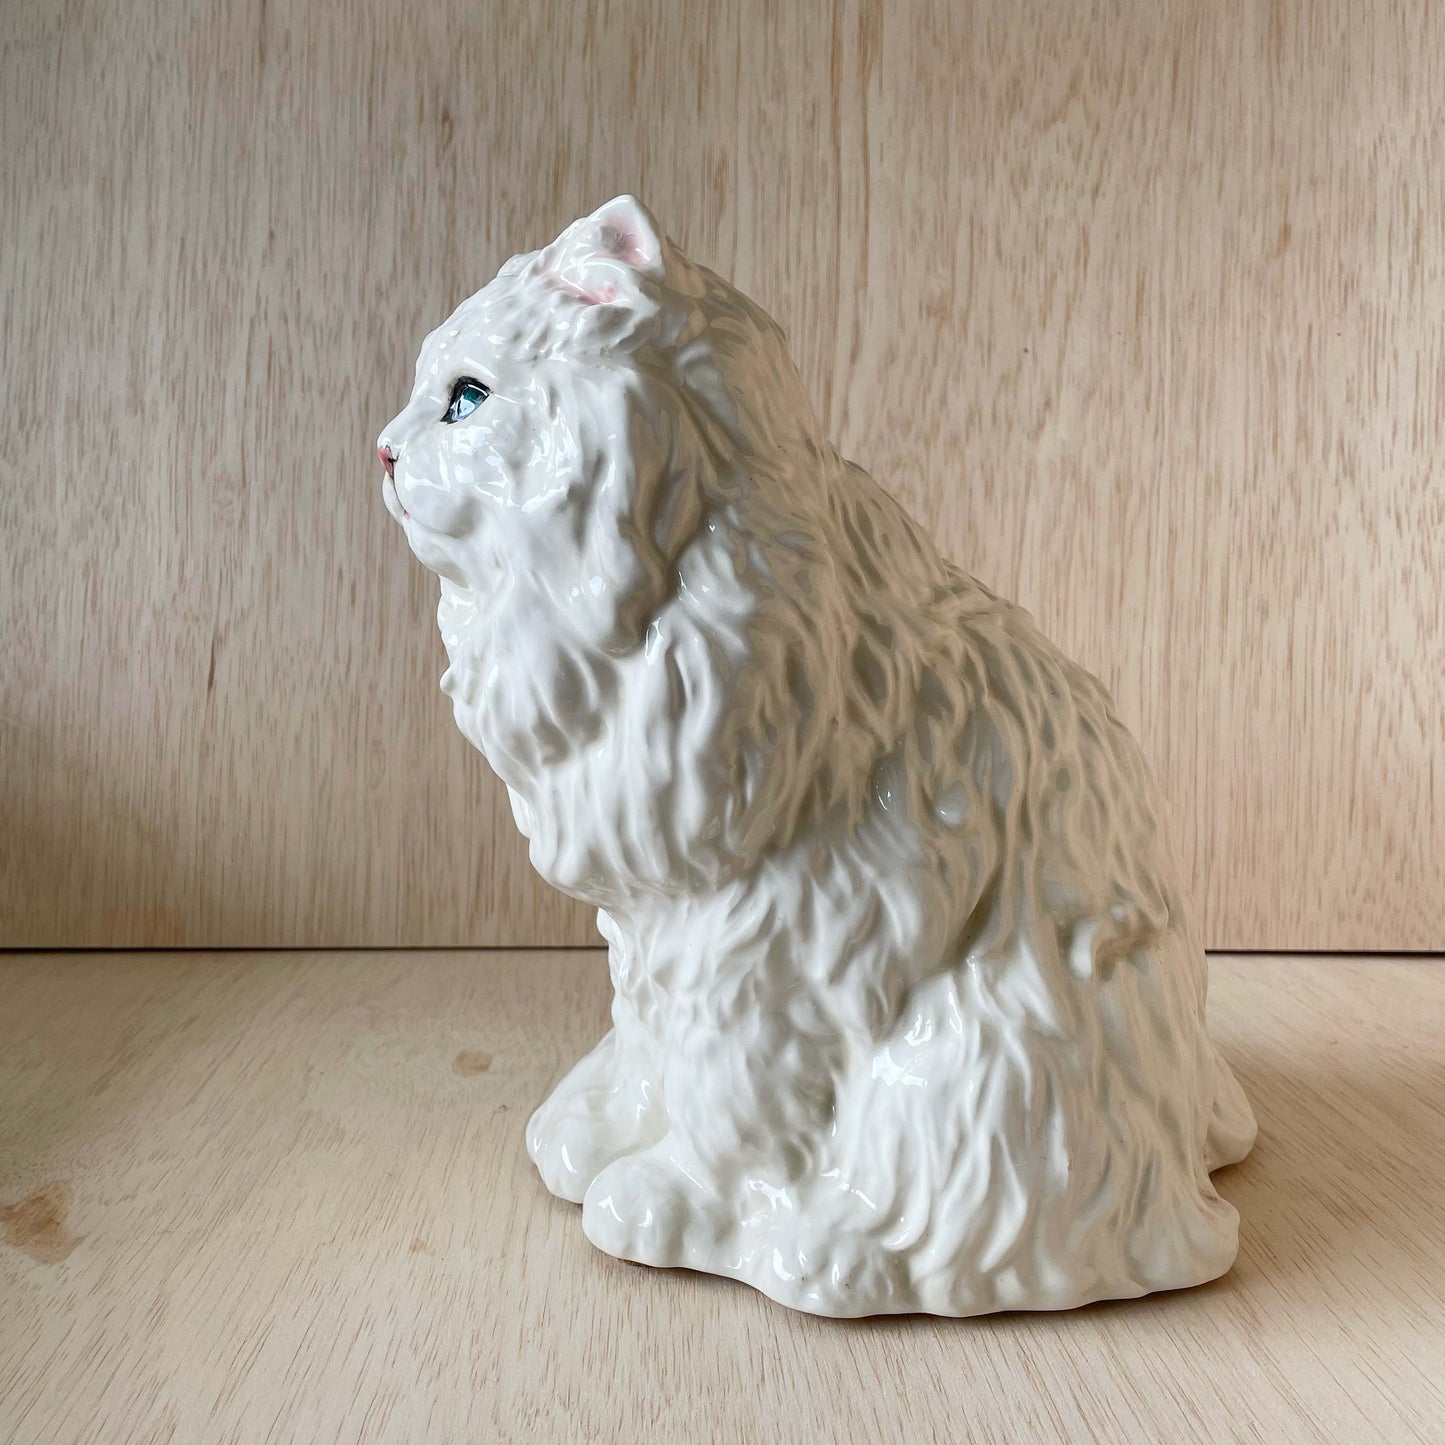 Townsends Ceramic Hand Painted White Persian Cat with Blue Eyes